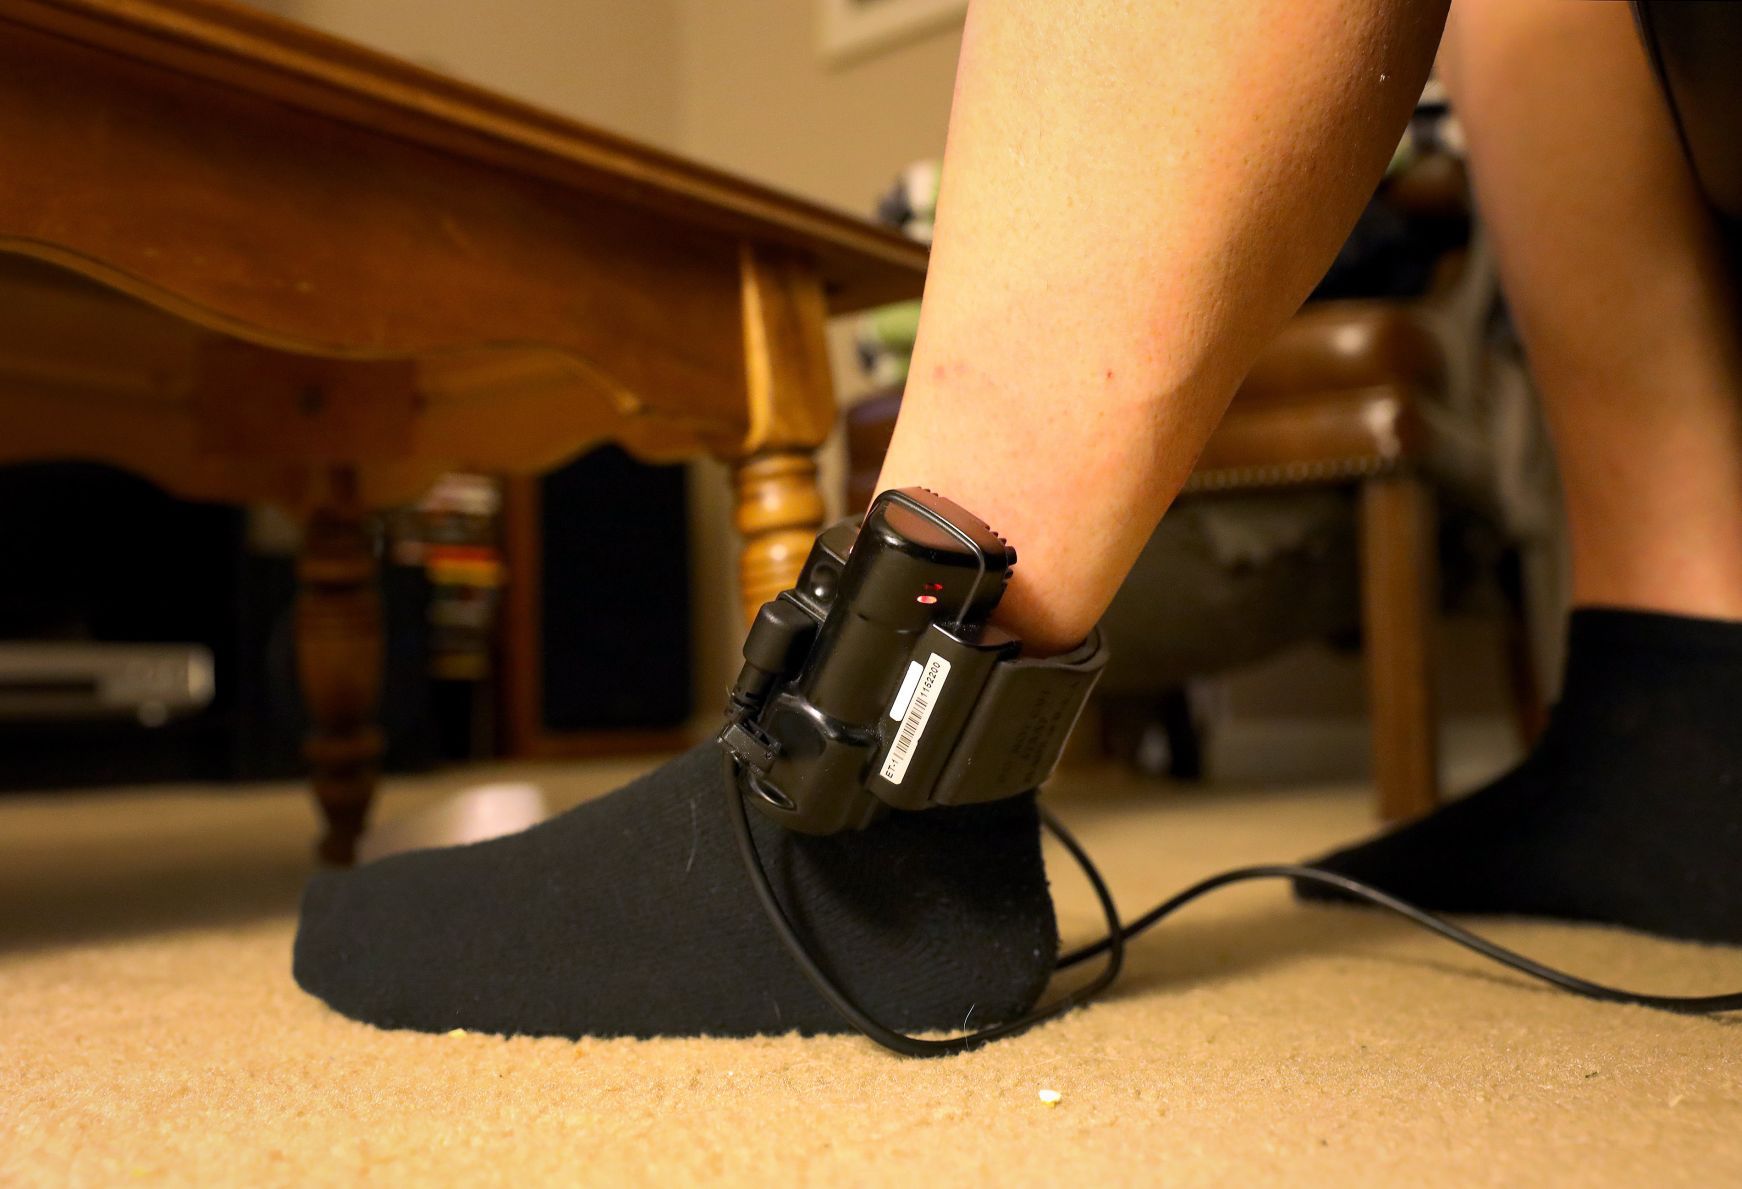 GPS/RF Tracking One-Piece Ankle Bracelet | ERA monitoring systems.